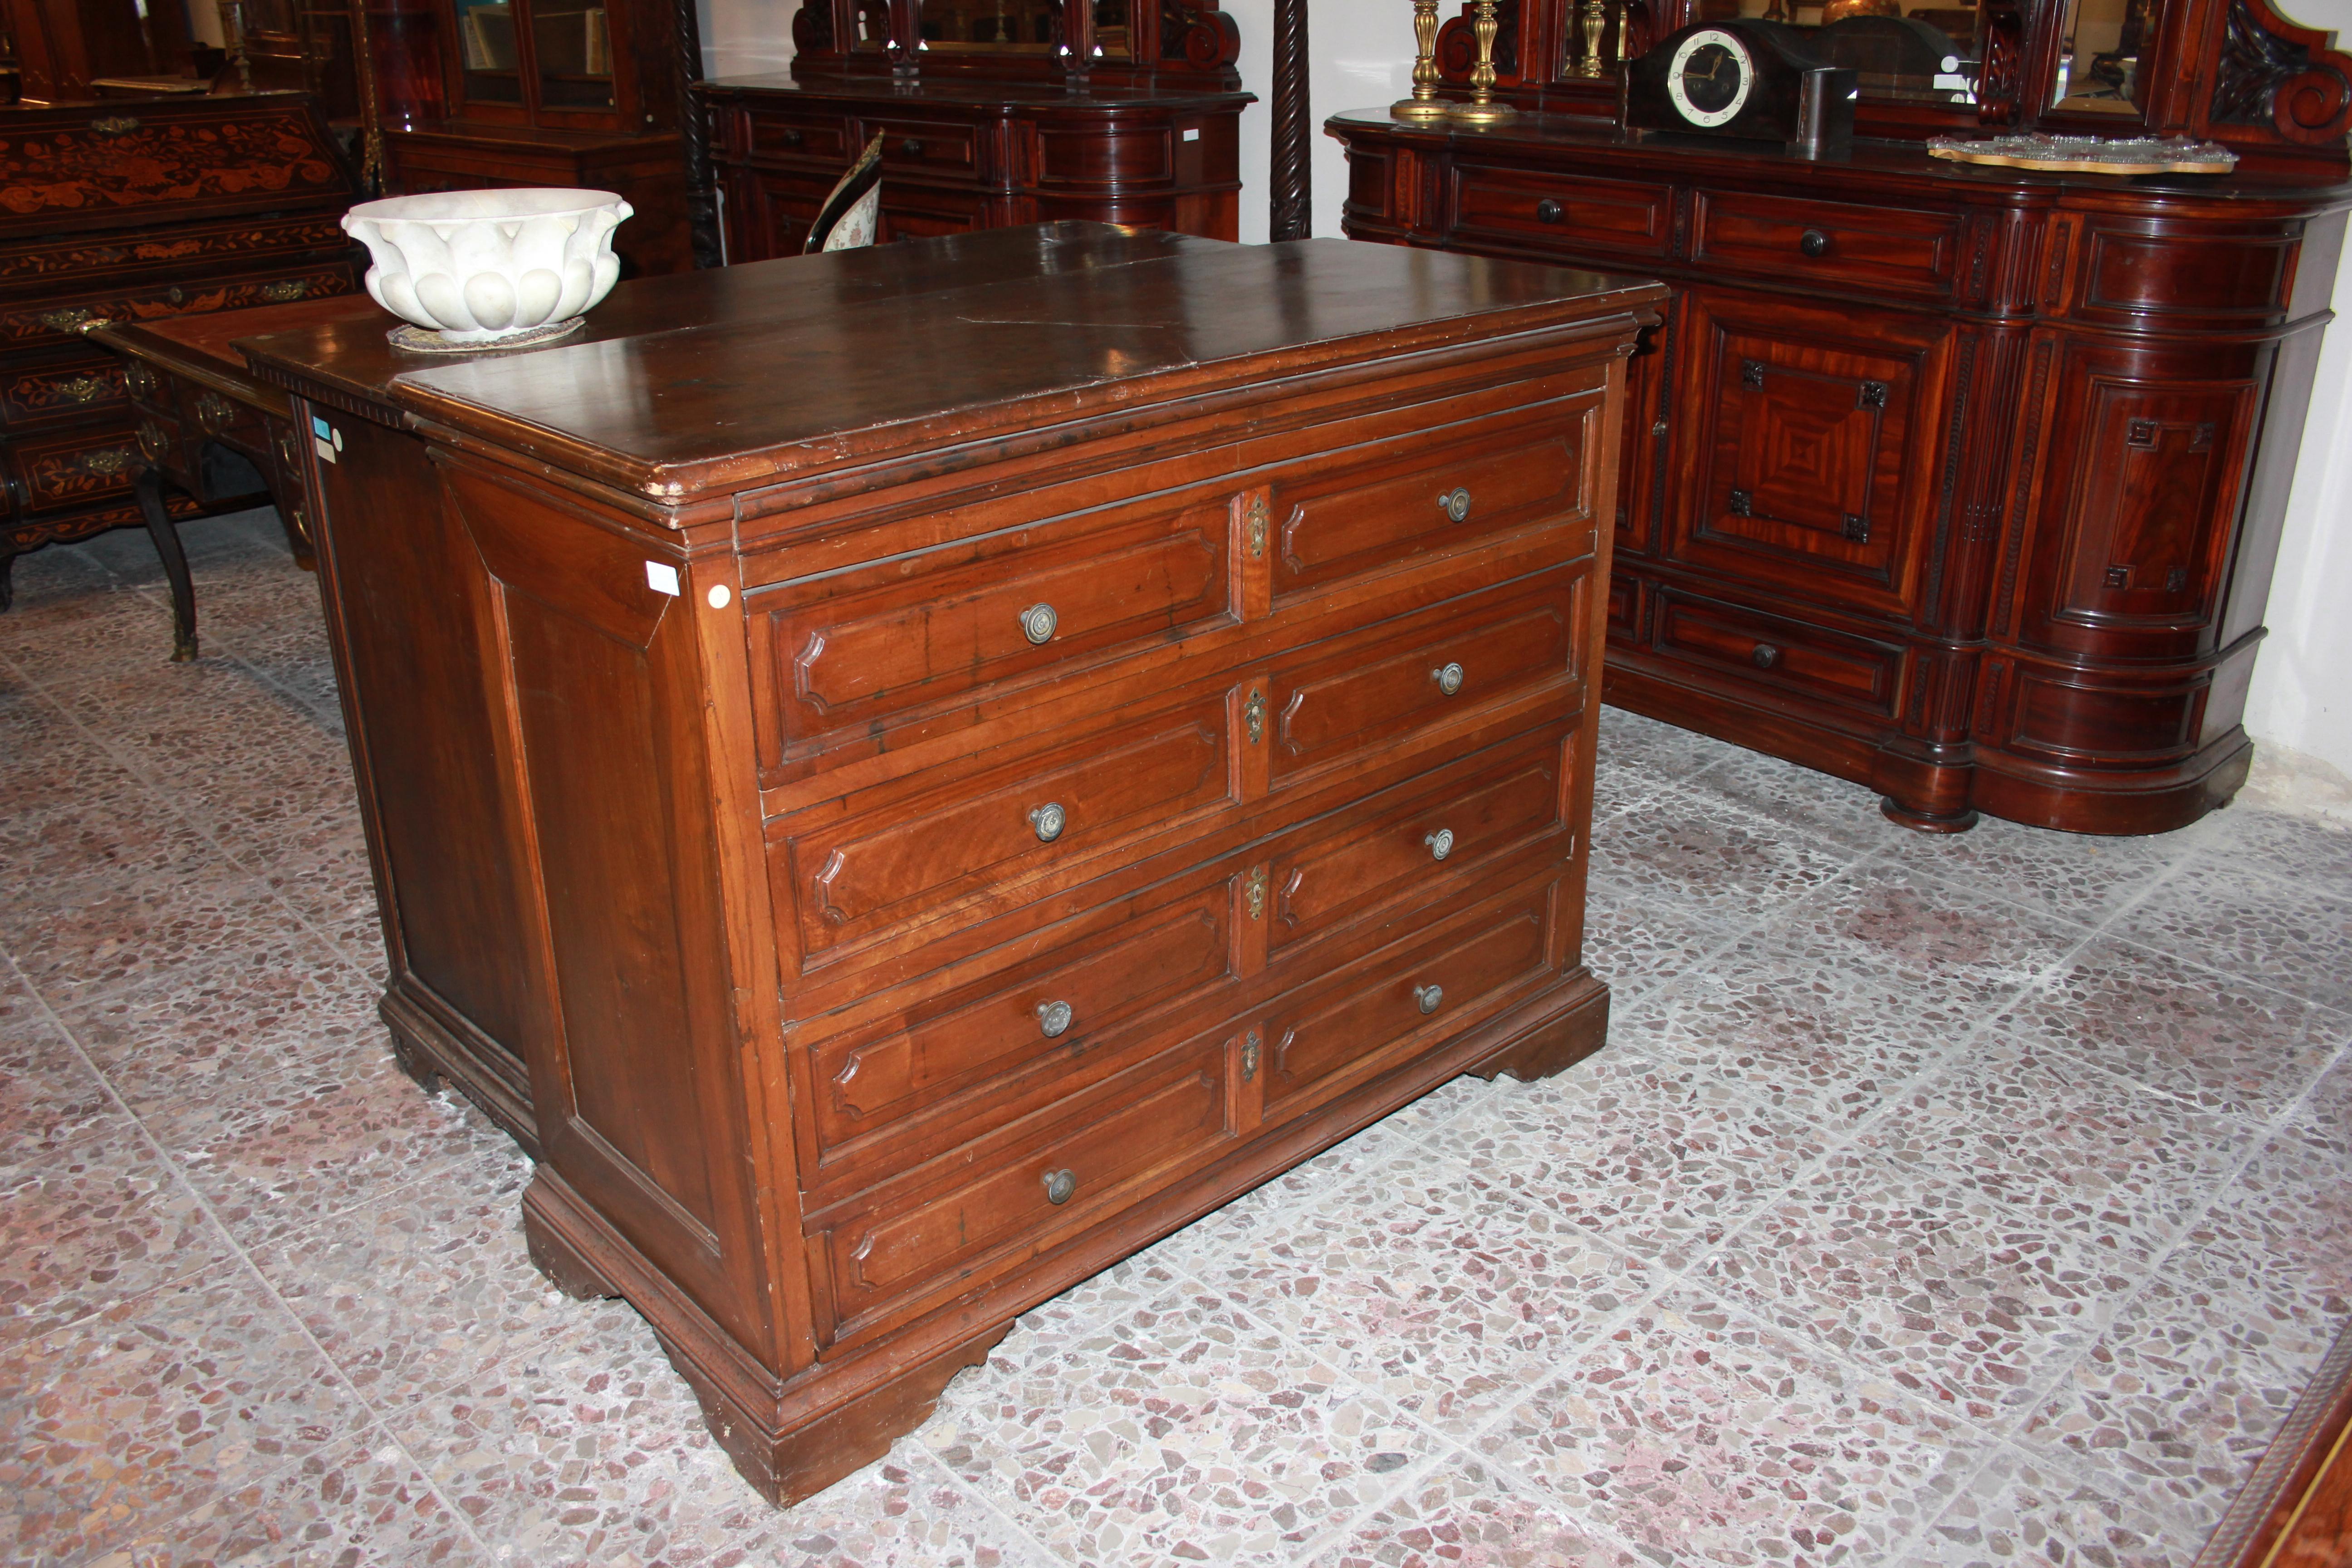 Italian walnut chest of drawers from the 1600s. It features a small drawer below the top and 4 large drawers.

Origin: Italy, Tuscany

Period: 1600

Dimensions: 136x58x106h cm